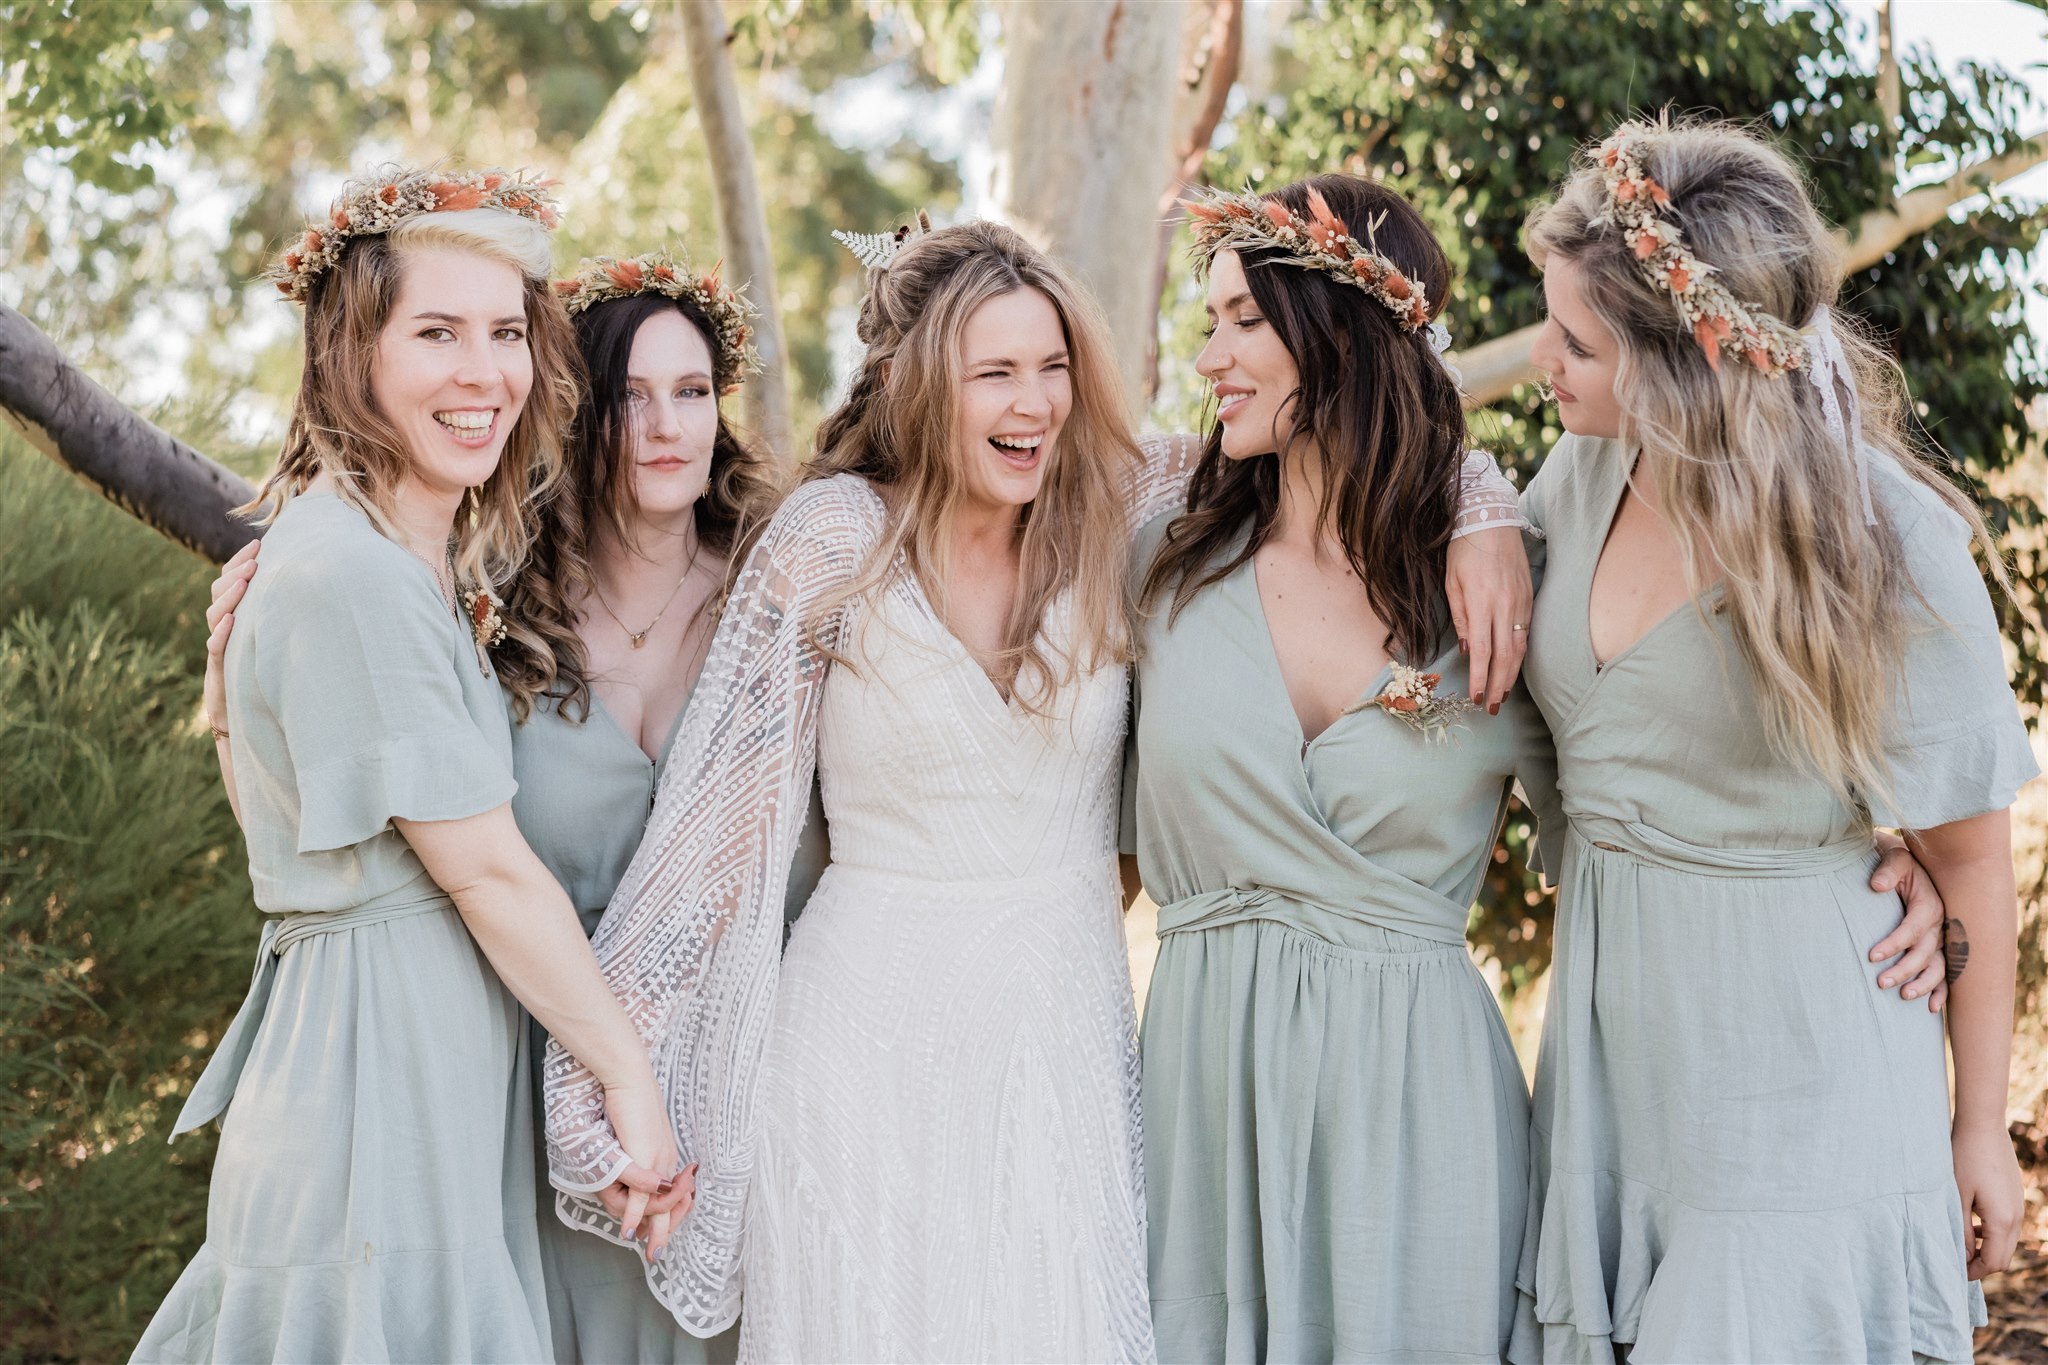 Bride with her bridesmaids at her gorgeous boho wedding held at the Baldivis Farm Stay / Country Charm Weddings south of Perth, captured by Perth wedding photographer Lisa Watson Photography